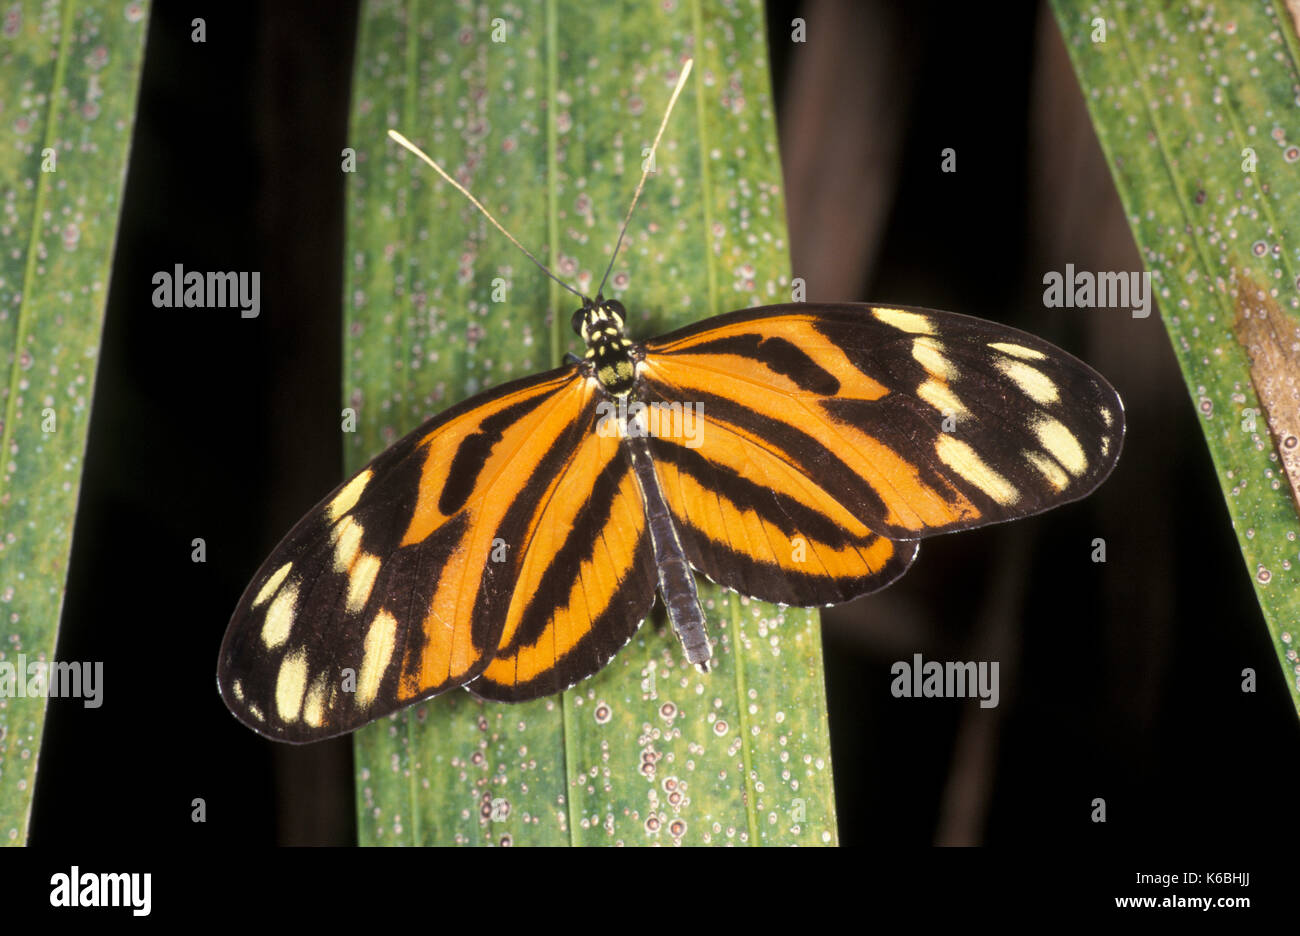 Tiger Striped Long Wing Butterfly, Helicon Ismenius telchinia, Nymphalidae family  Central America and Northern South America Stock Photo